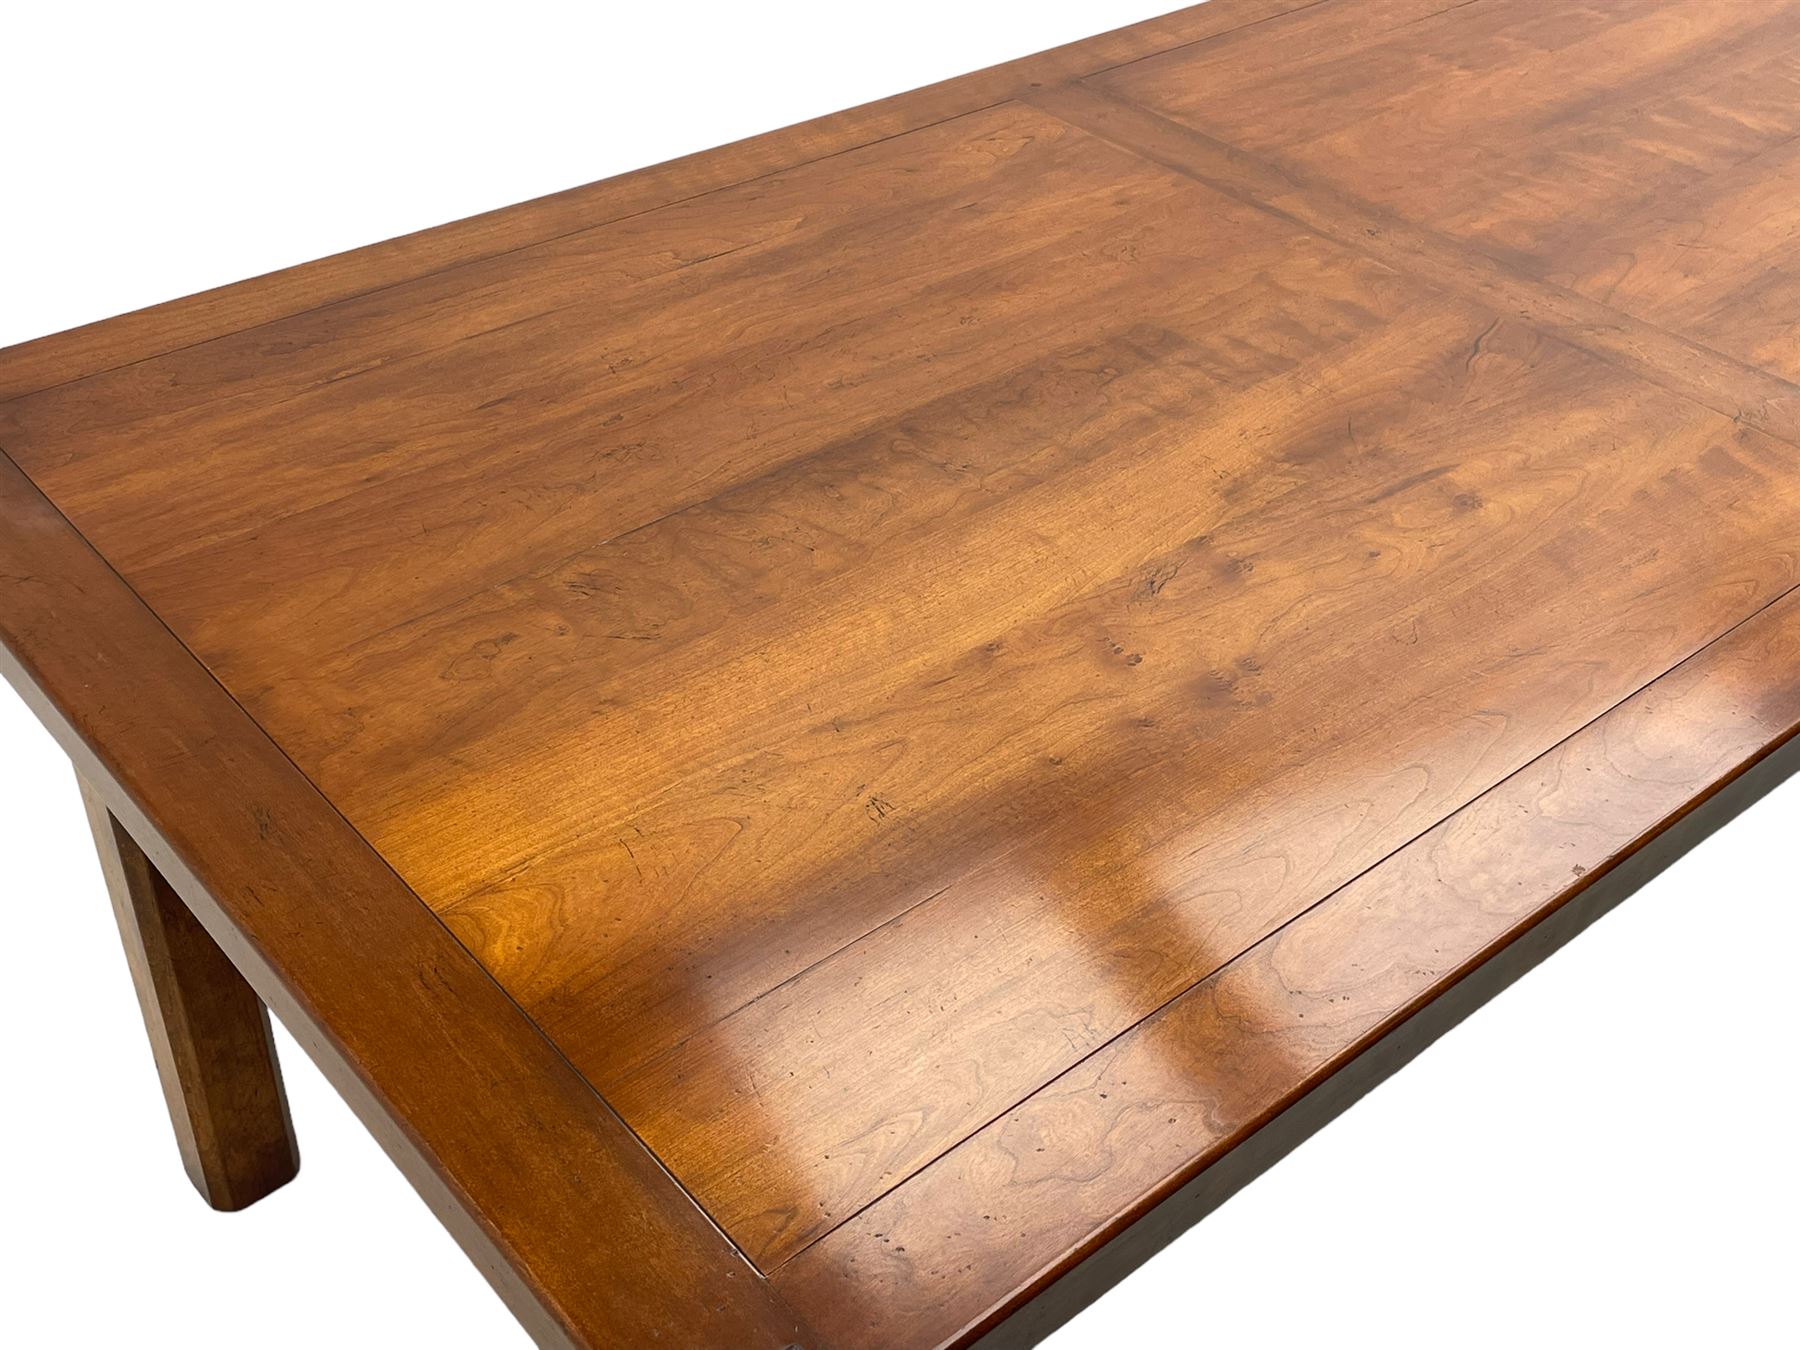 Contemporary French farmhouse design cherry wood dining table - Image 4 of 10